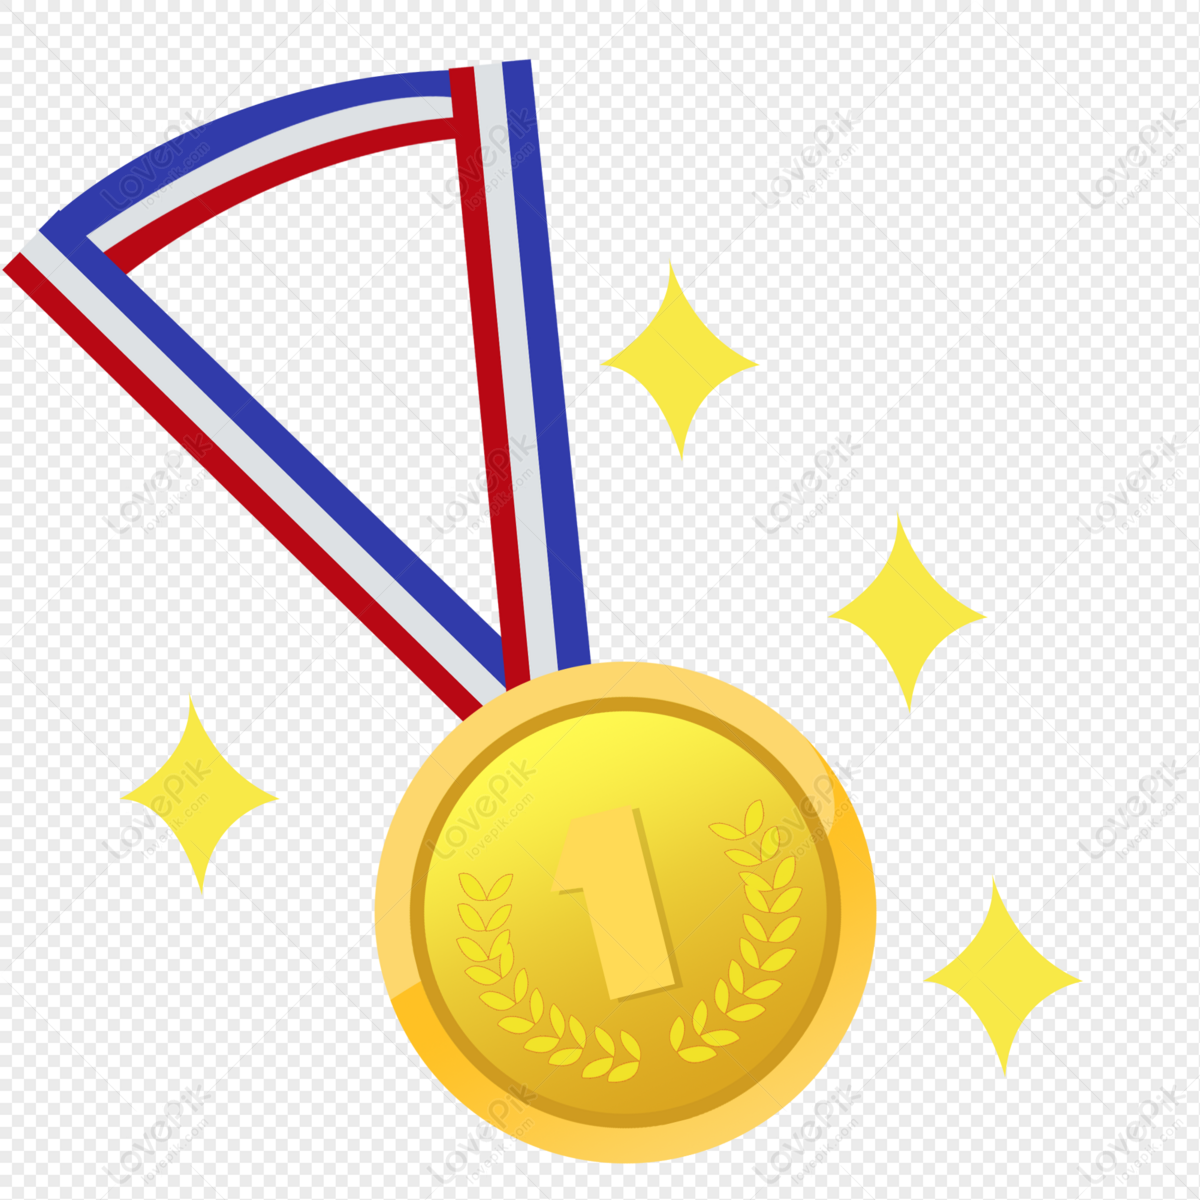 Glittering Gold Medal PNG Transparent Background And Clipart Image For Free  Download - Lovepik | 401248320